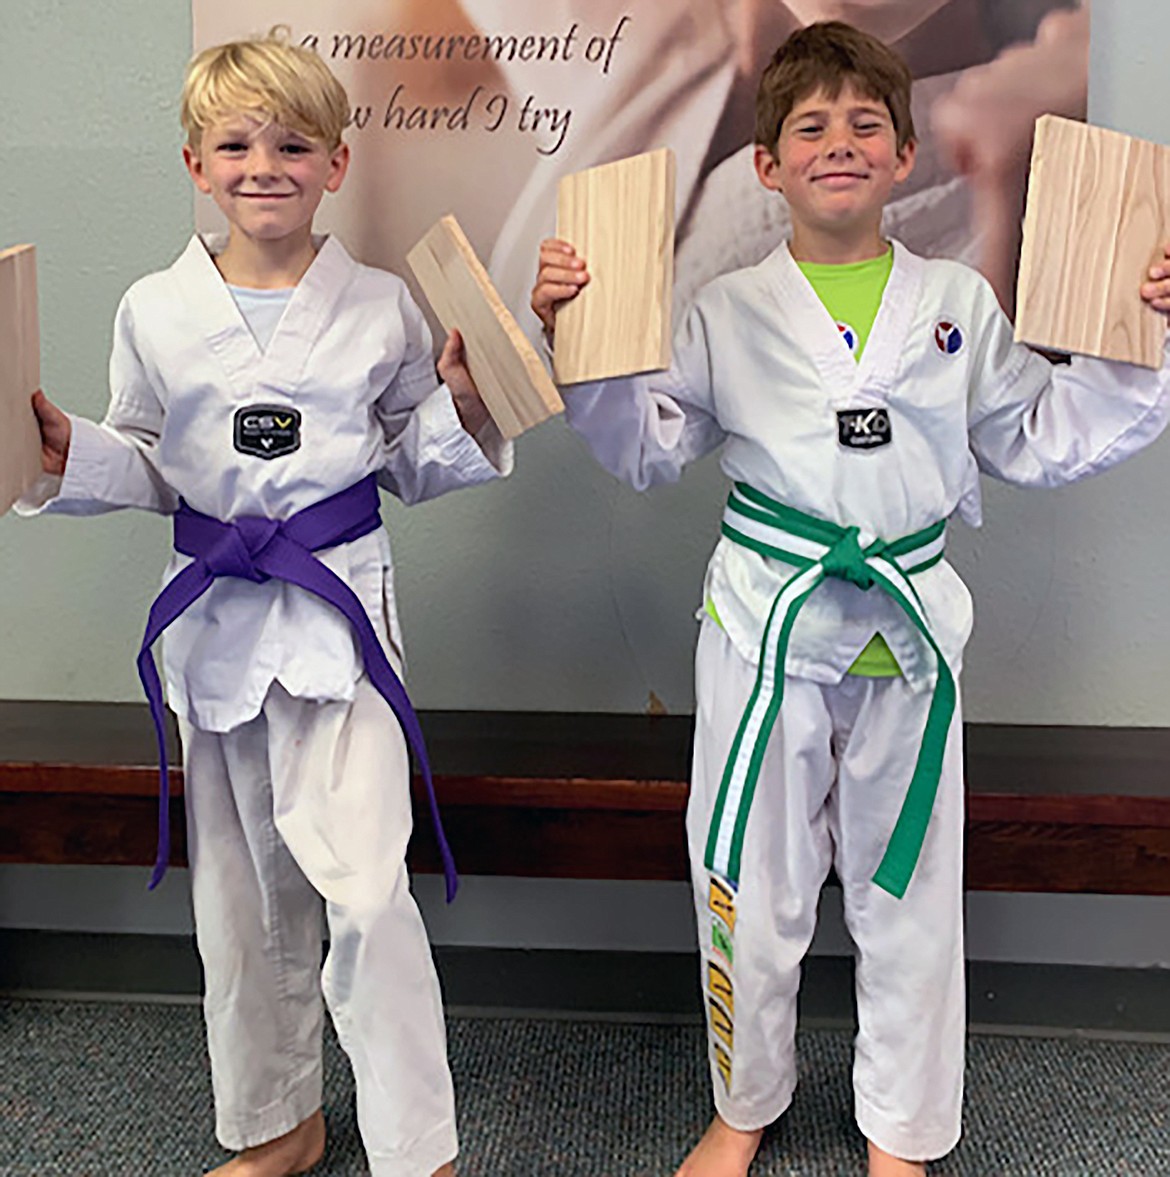 Gavin Schuck, left, recently earned a purple belt, while Dom Cipriano, right, recently earned a green stripe belt in recent belt testing at Sandpoint Martial Arts.